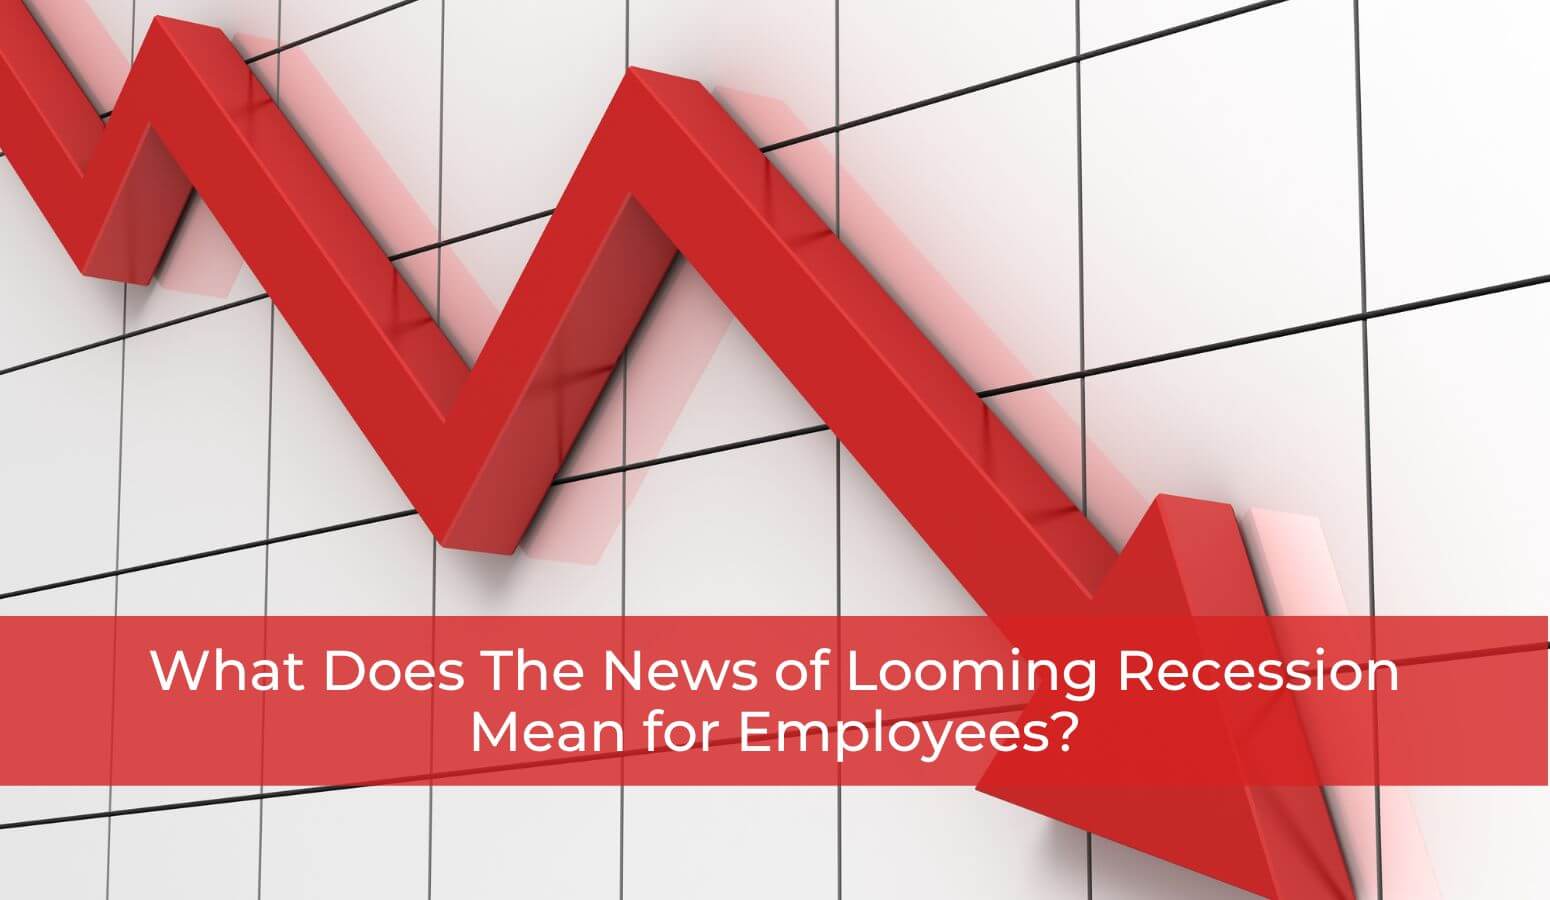 Featured image for “What Does The News of Looming Recession Mean for Employees?”